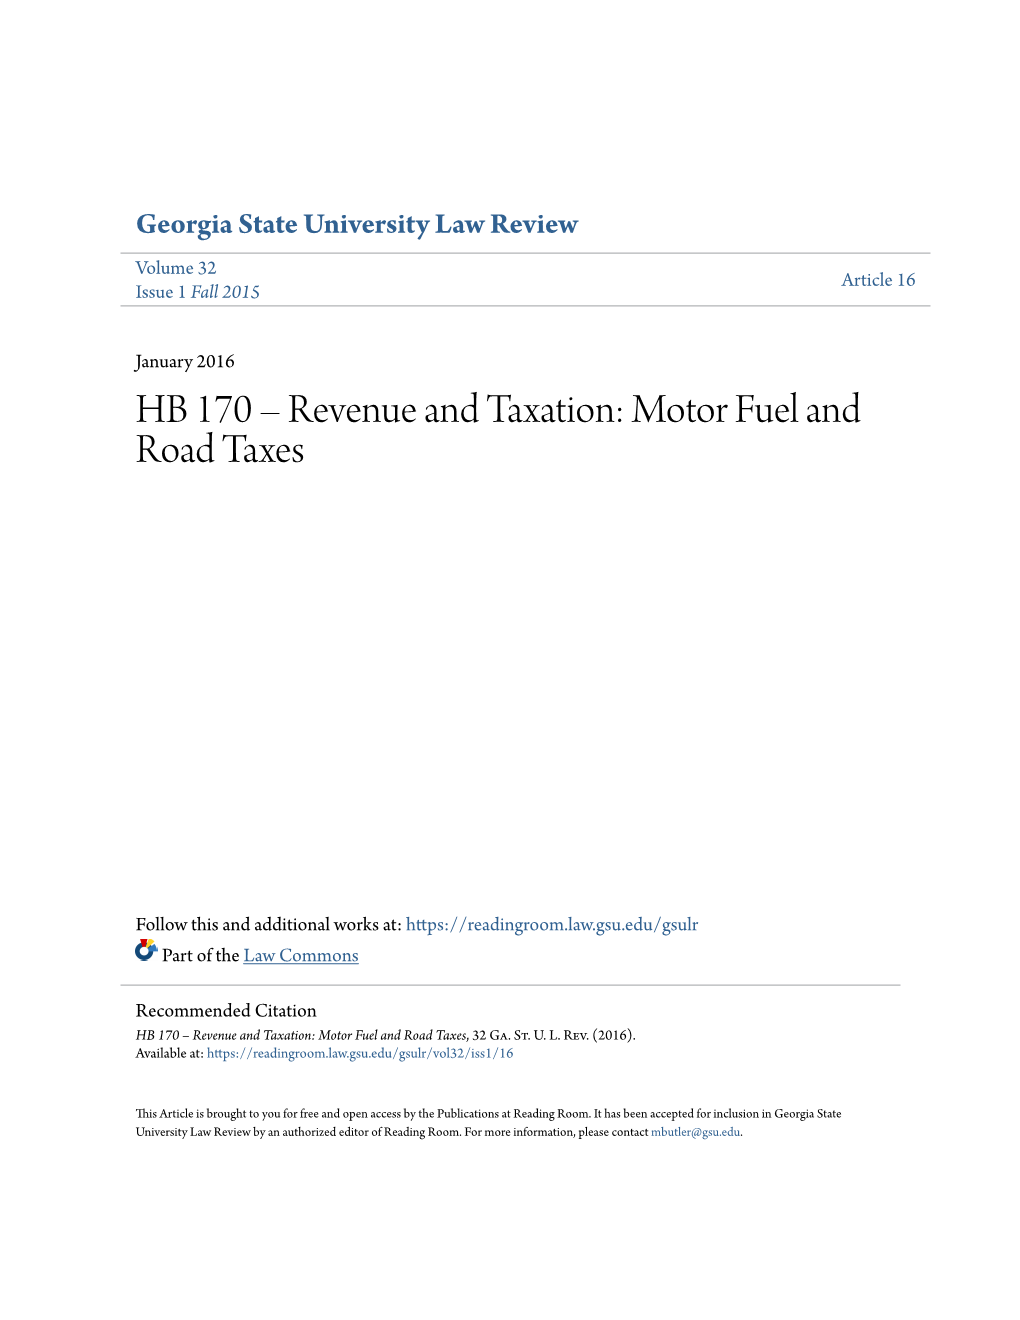 Motor Fuel and Road Taxes